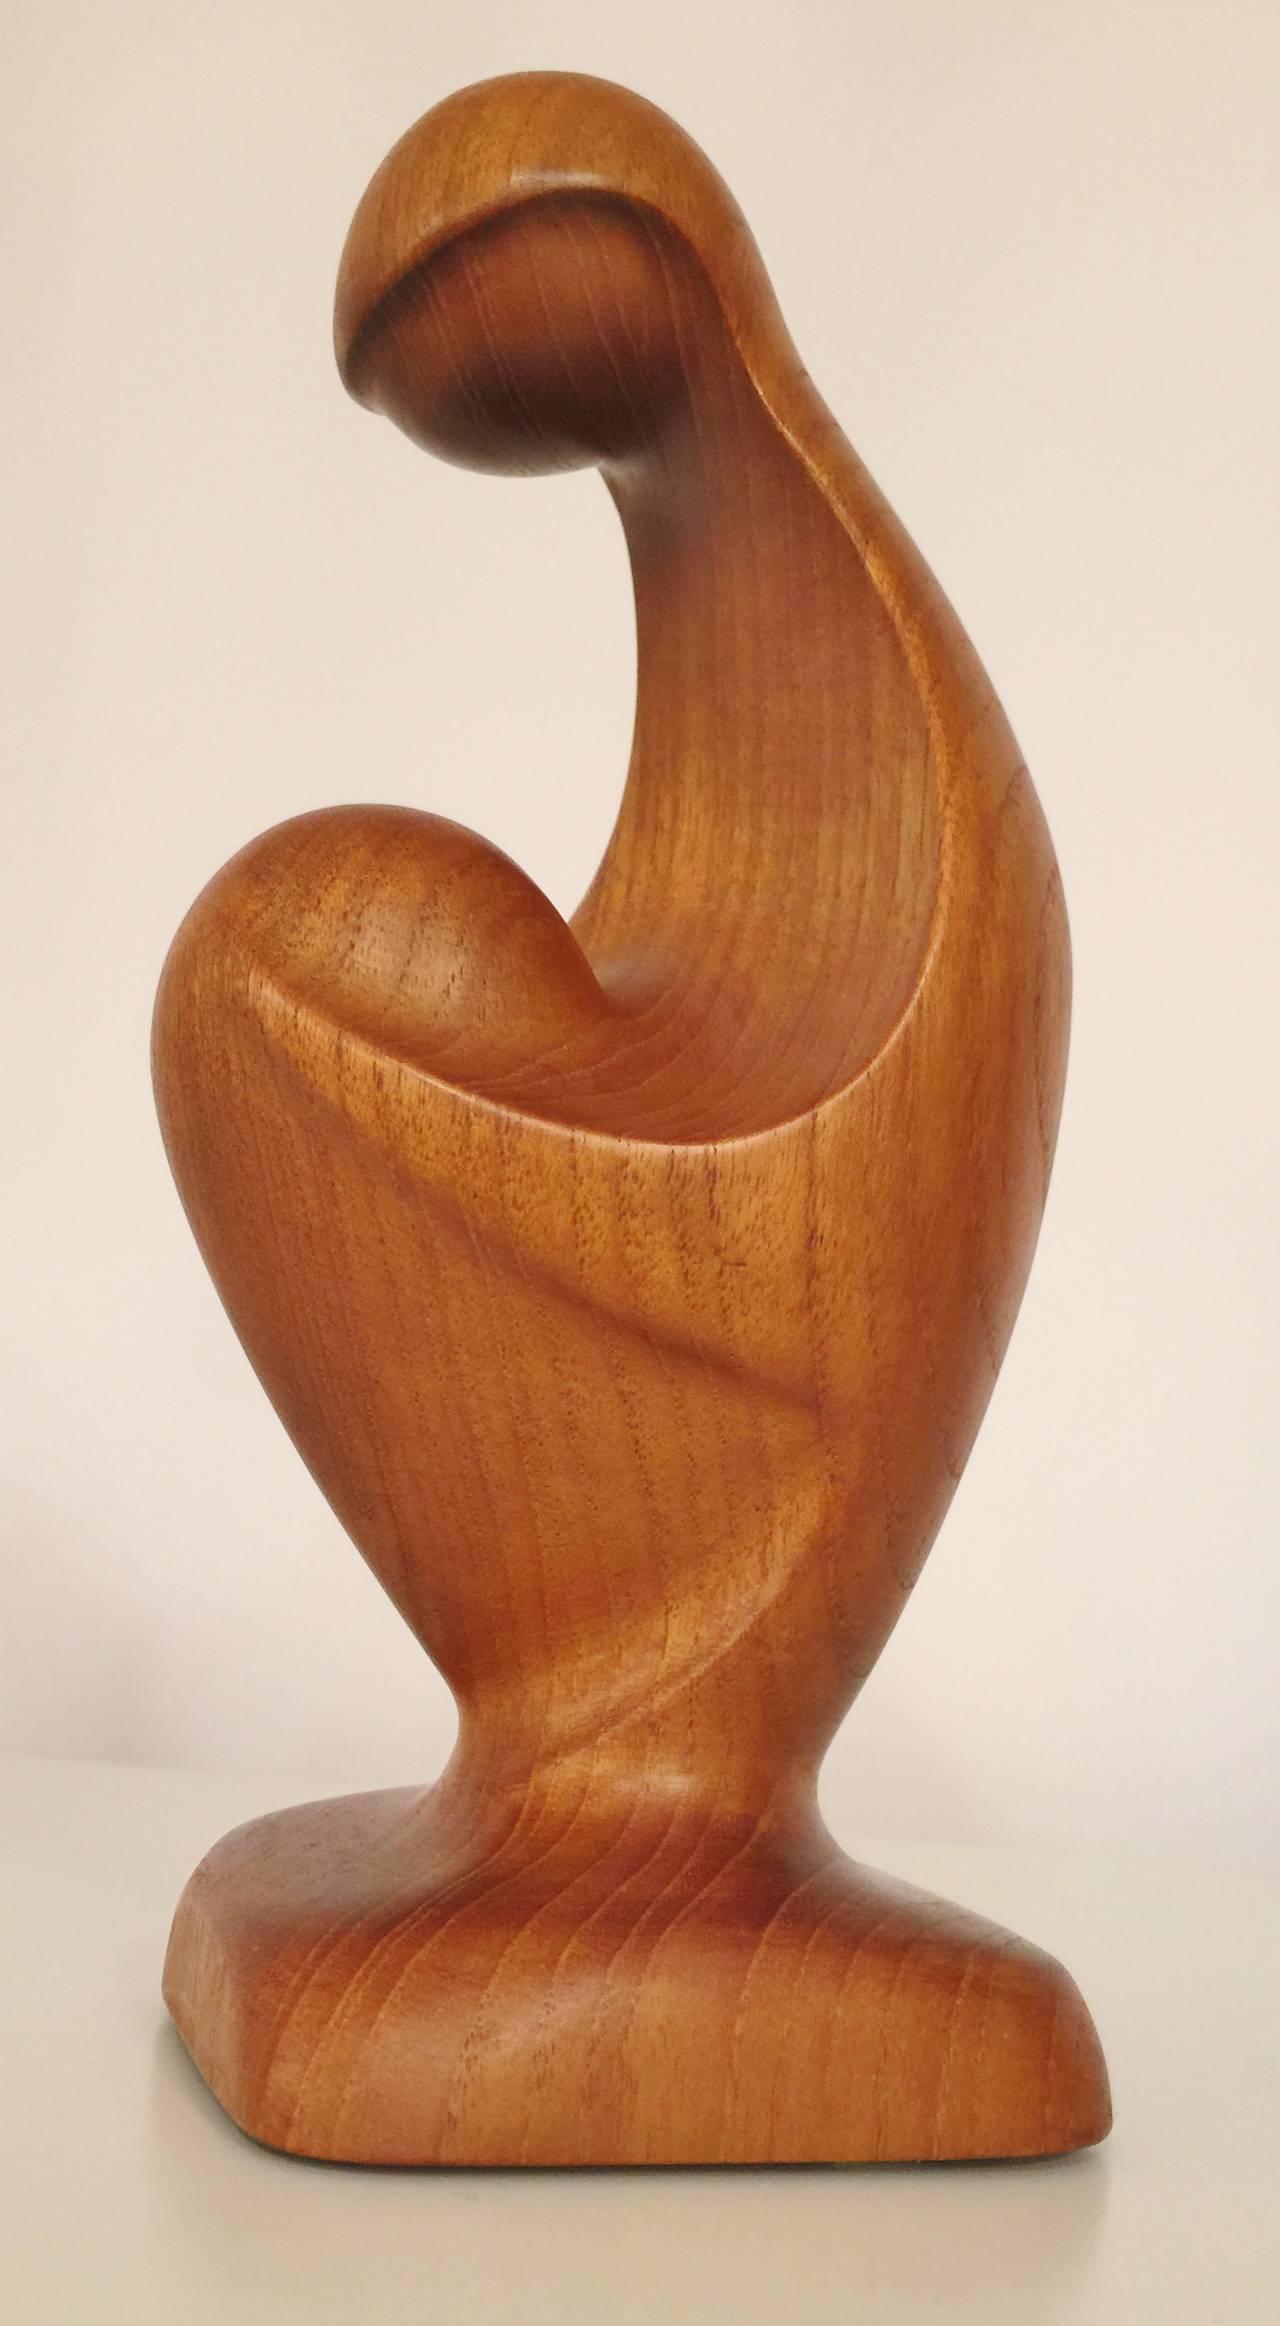 Carved Teak Sculpture of Mother and Child by Simon Randers